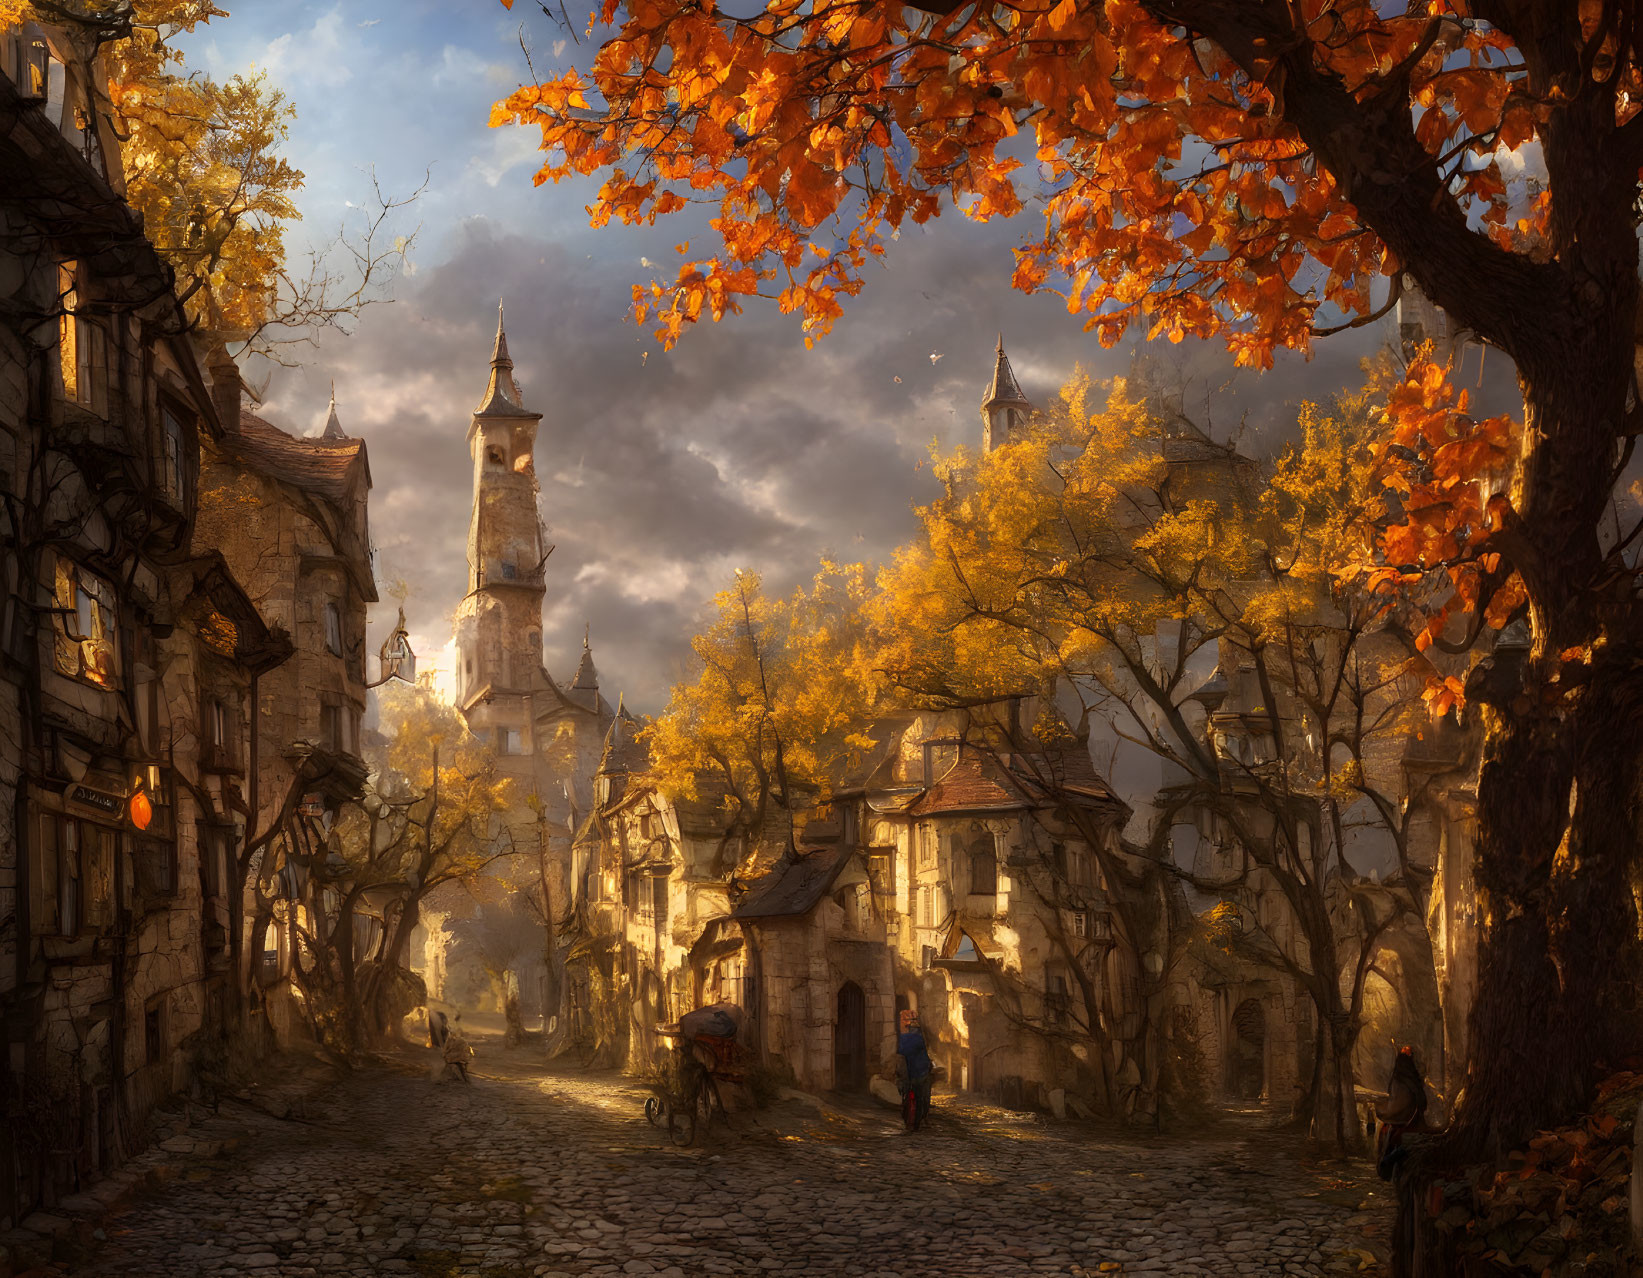 Tranquil Autumn Village with Cobblestone Streets and Golden Leaves